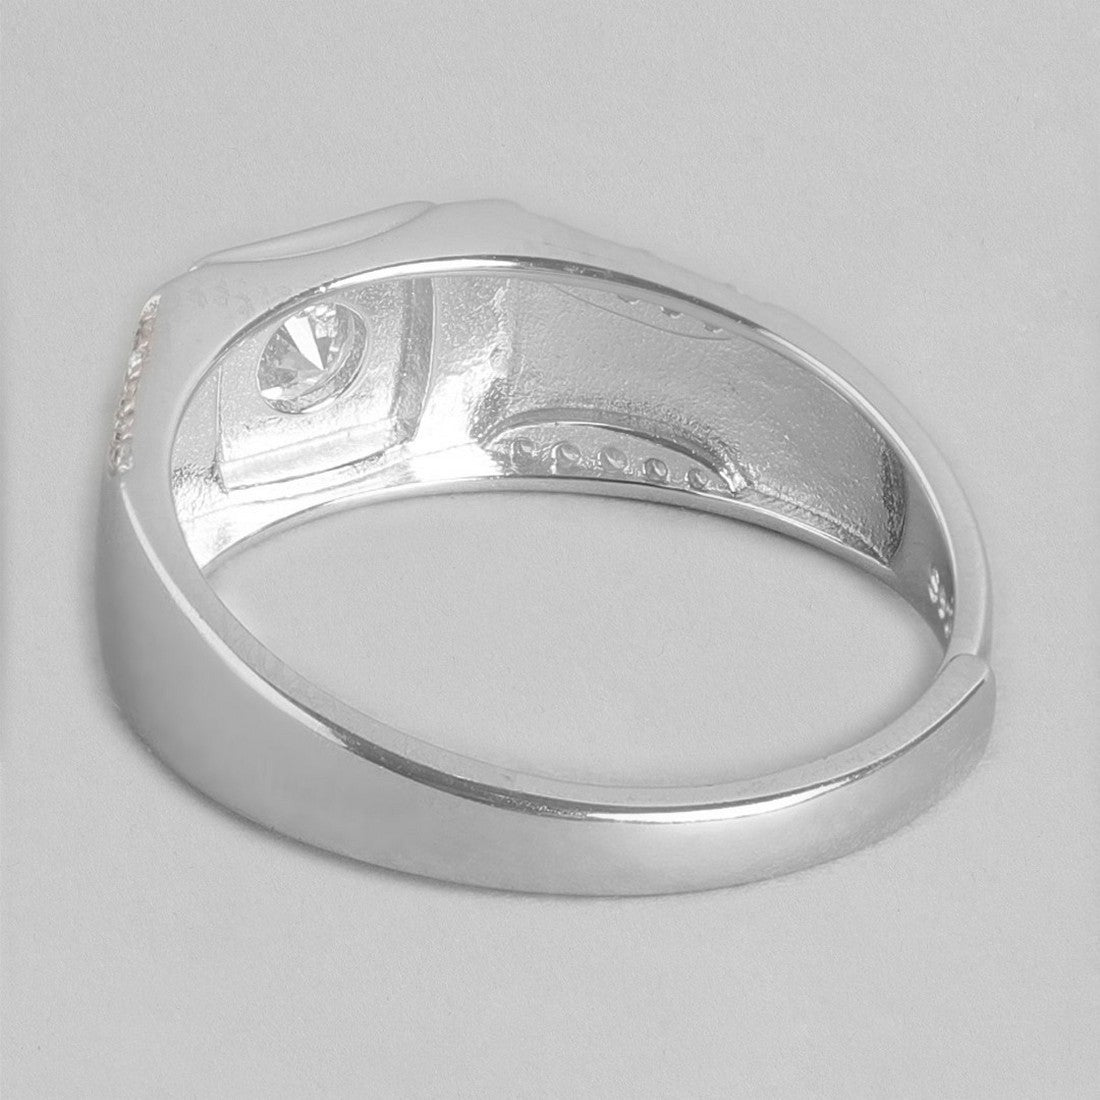 Solitaire 925 Sterling Silver Ring for Him (Adjustable)